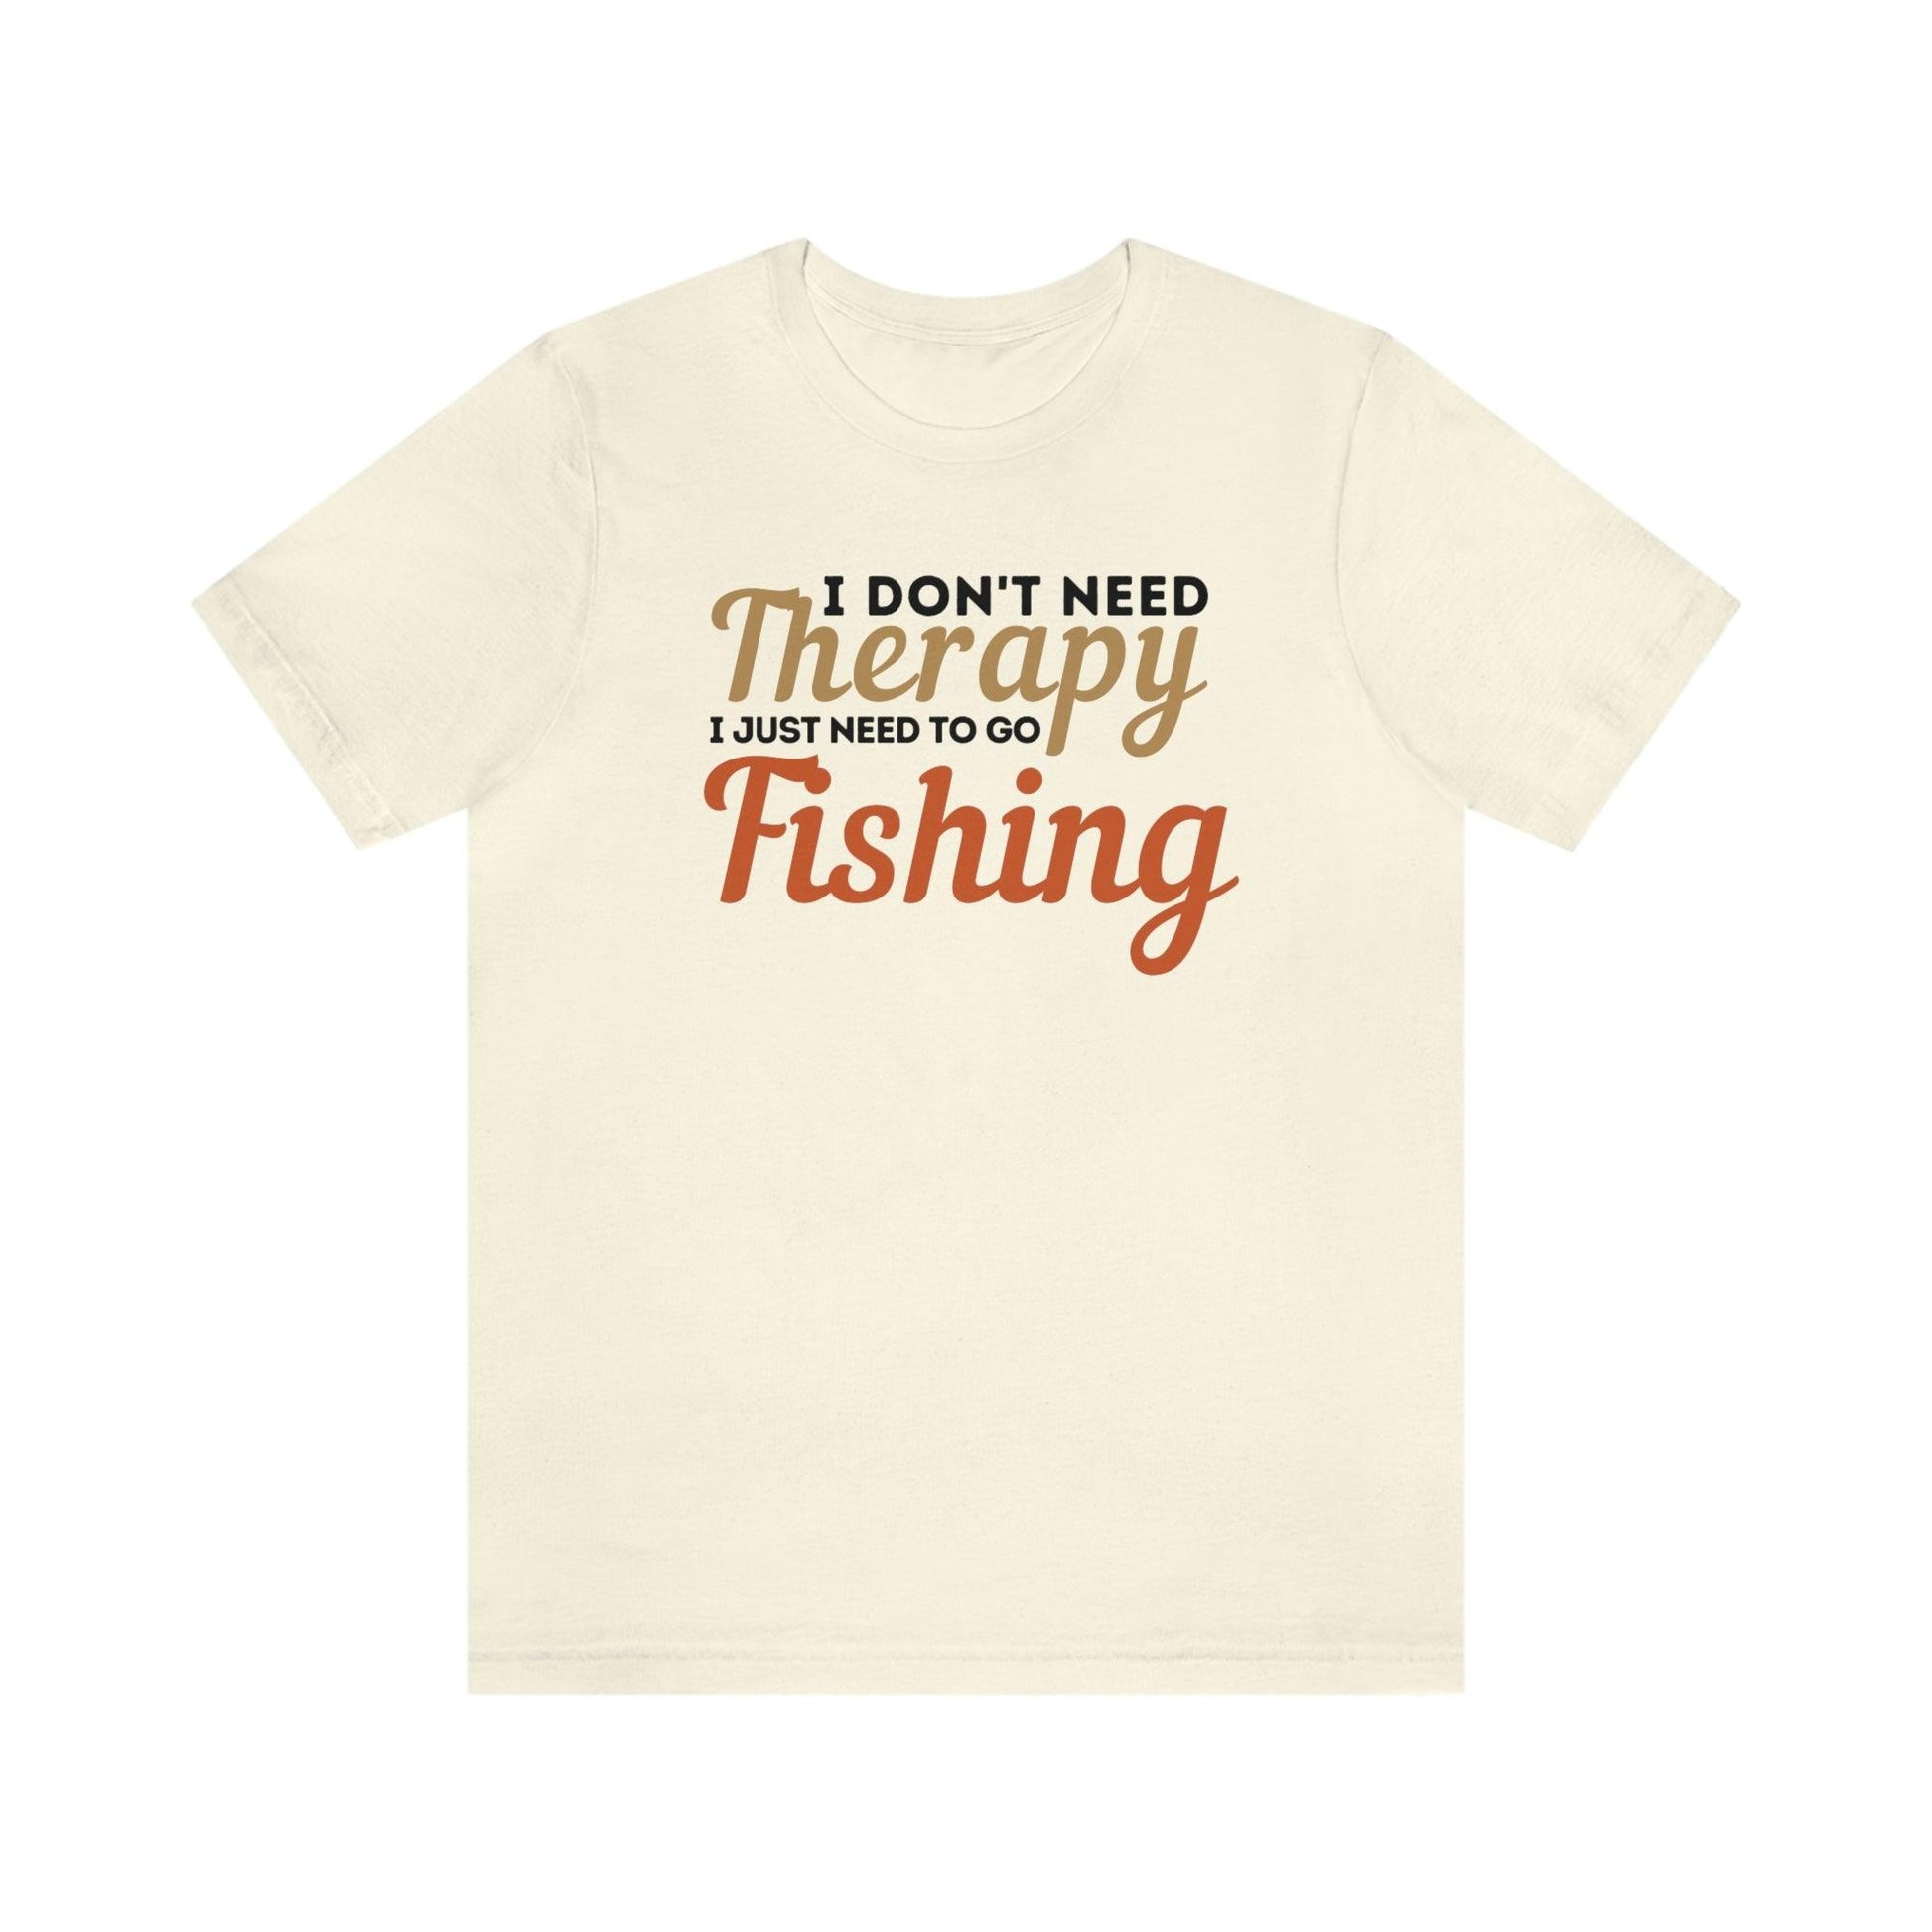 I don't need therapy I just need to go Fishing, fishing shirt, dad shirt, dad gift, gift for outdoor lover, fishing gift nature lover shirt - Giftsmojo